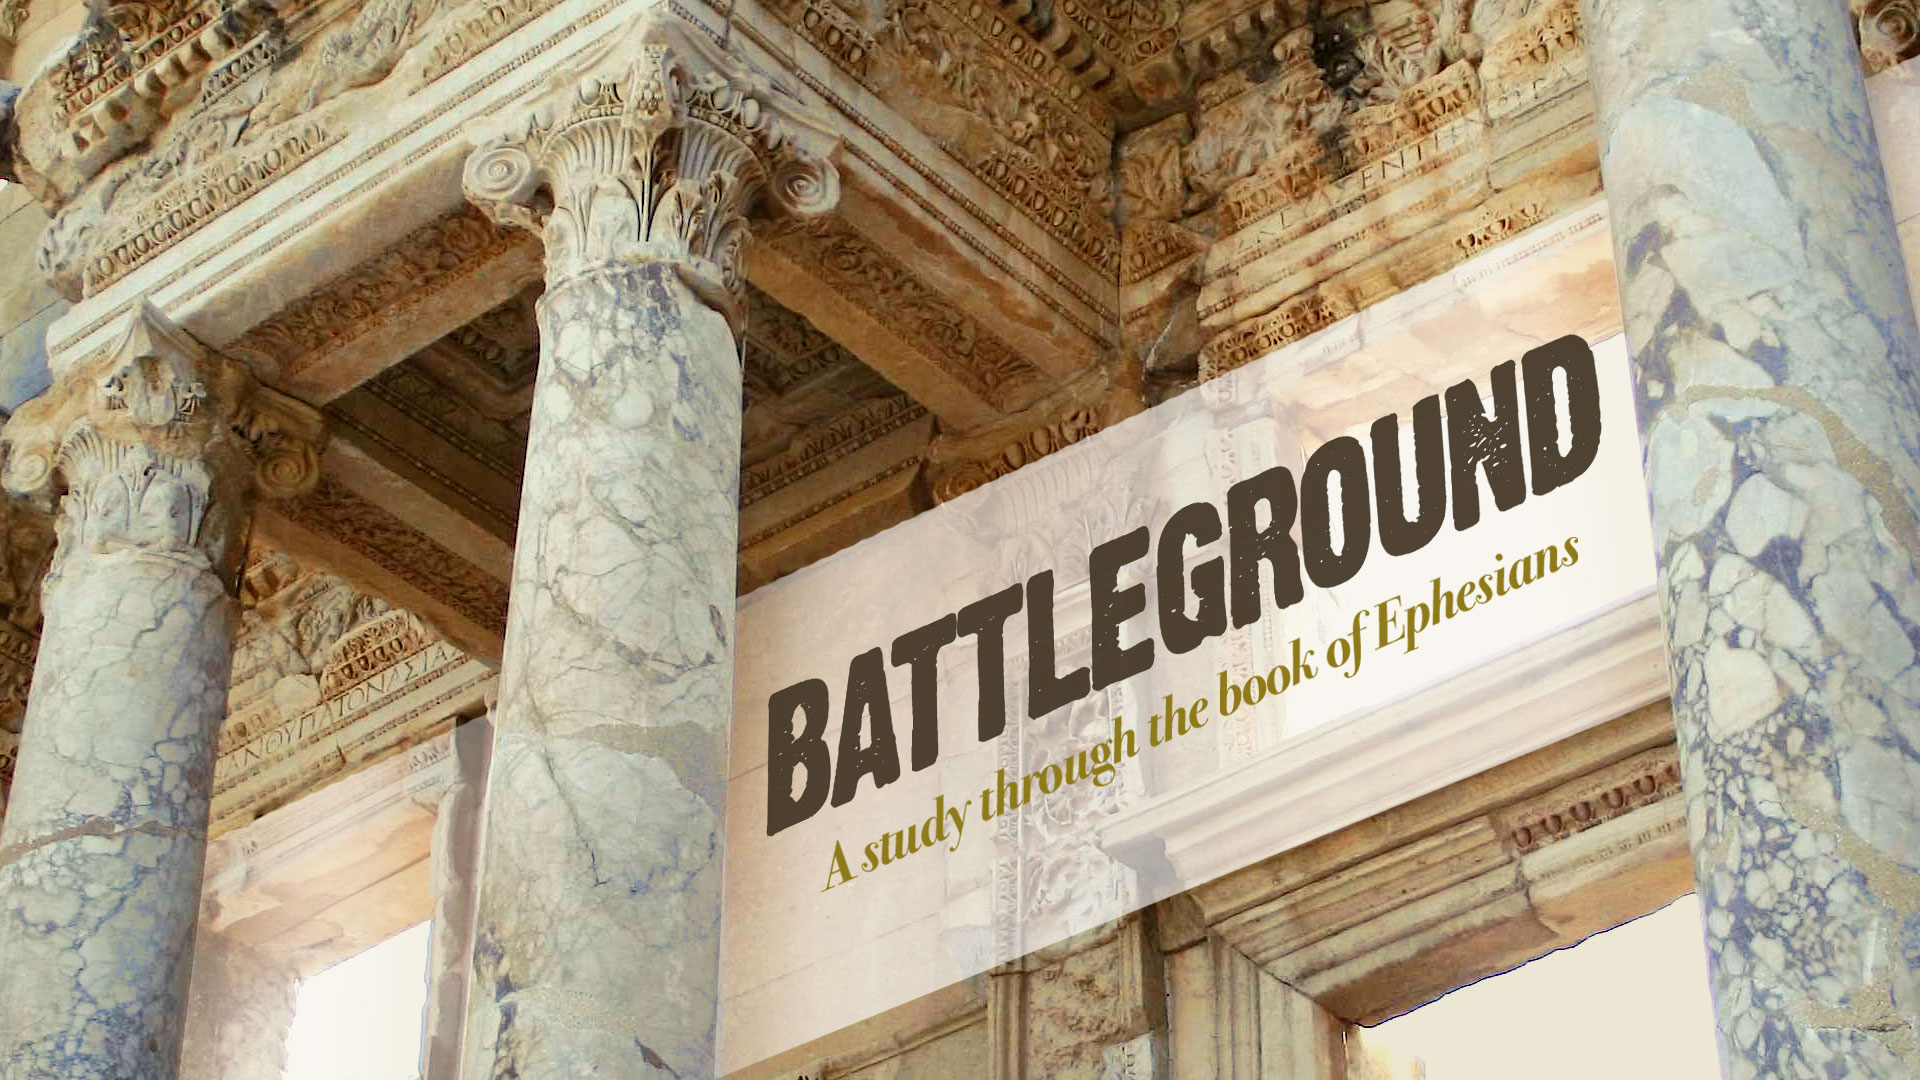 Battleground: From Convenience To Character